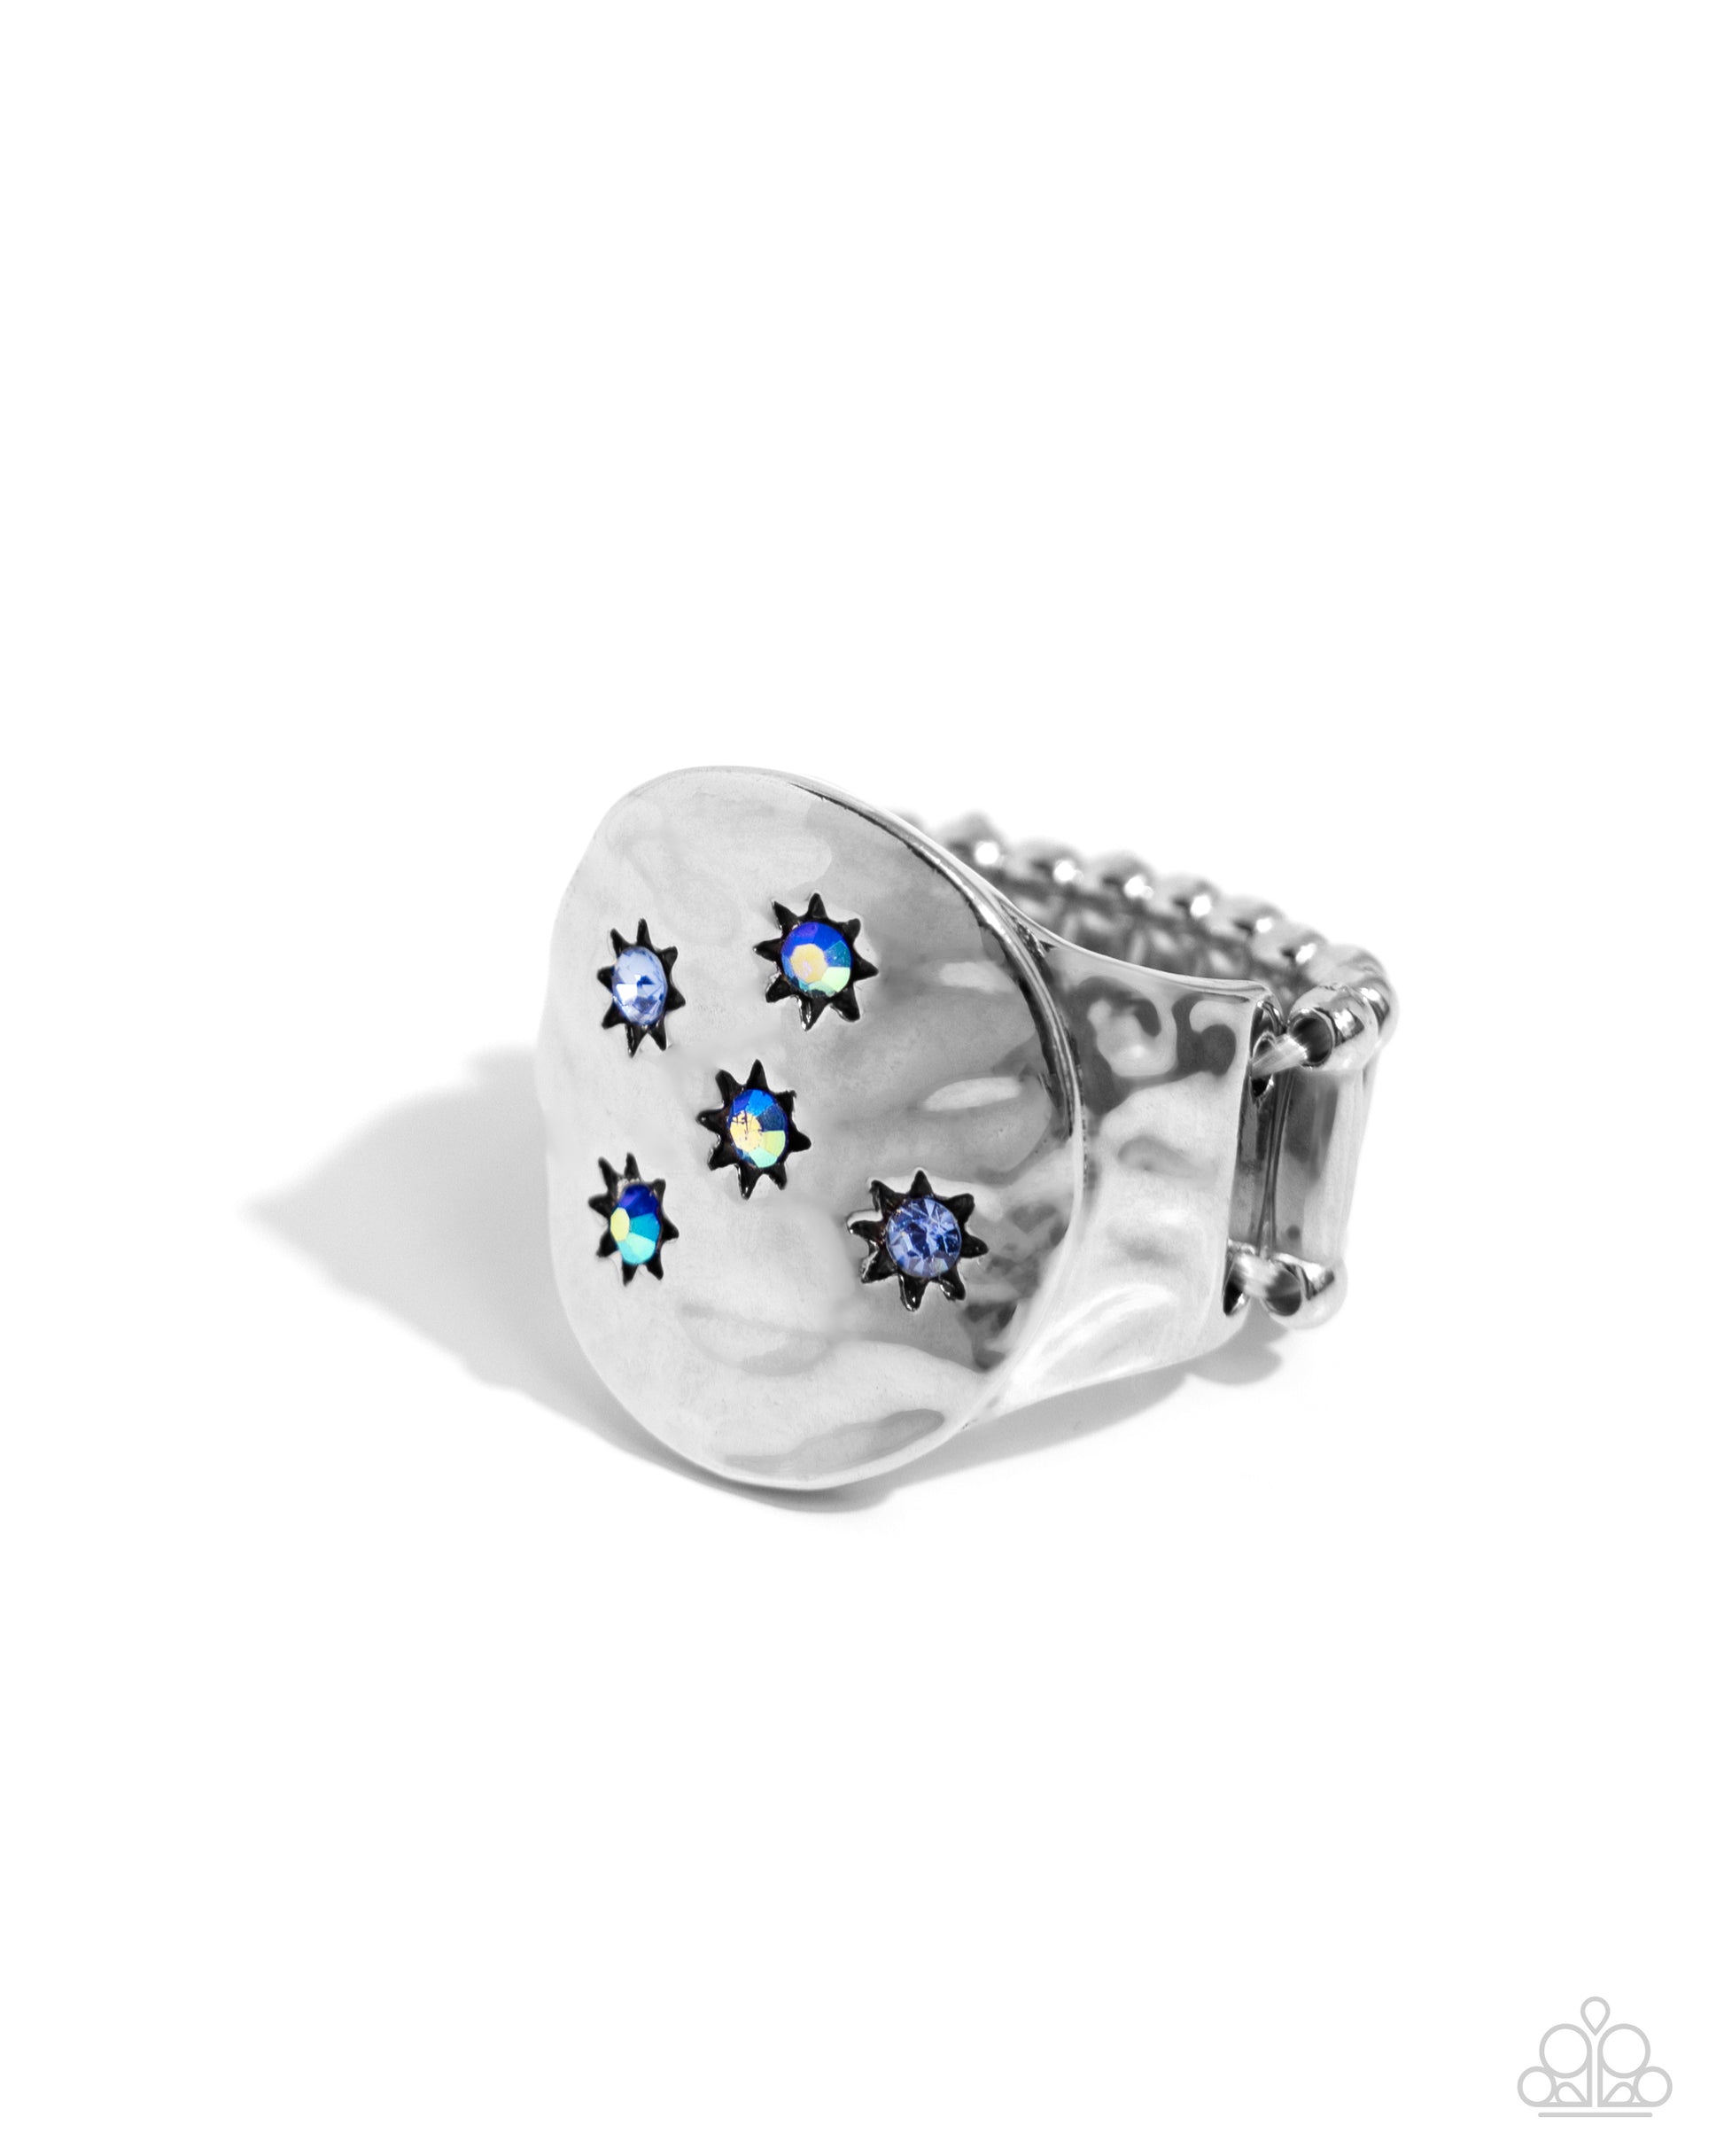 Starry Serenade - blue - Paparazzi ring